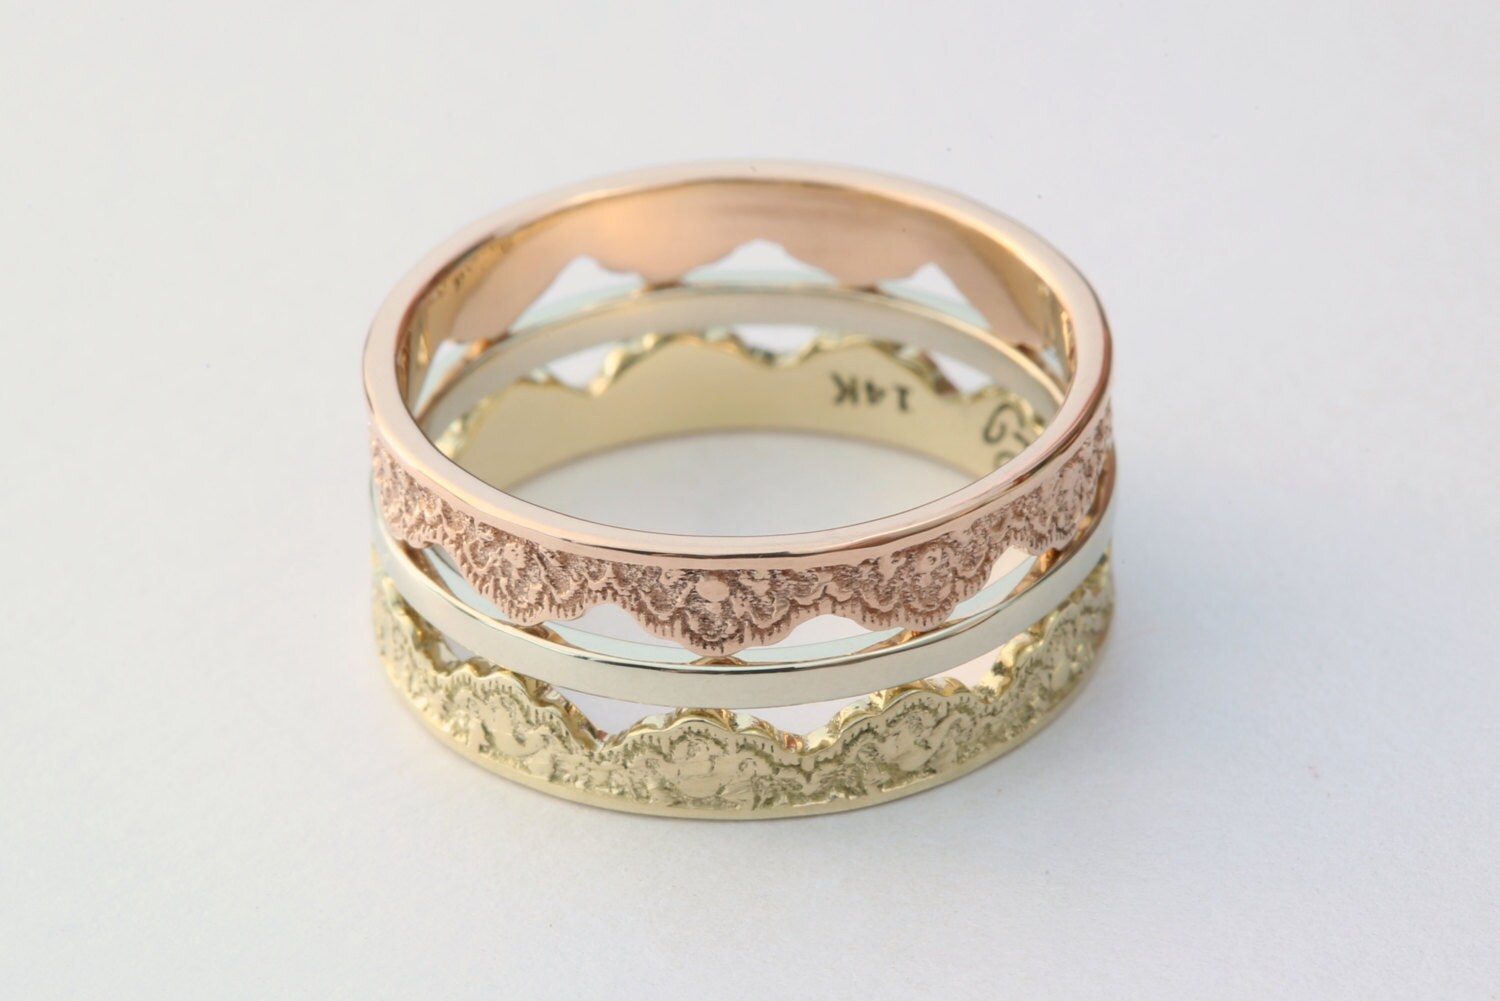 3 Gold Stacking Rings With Lace Pattern Gold Stackable Rings - Etsy